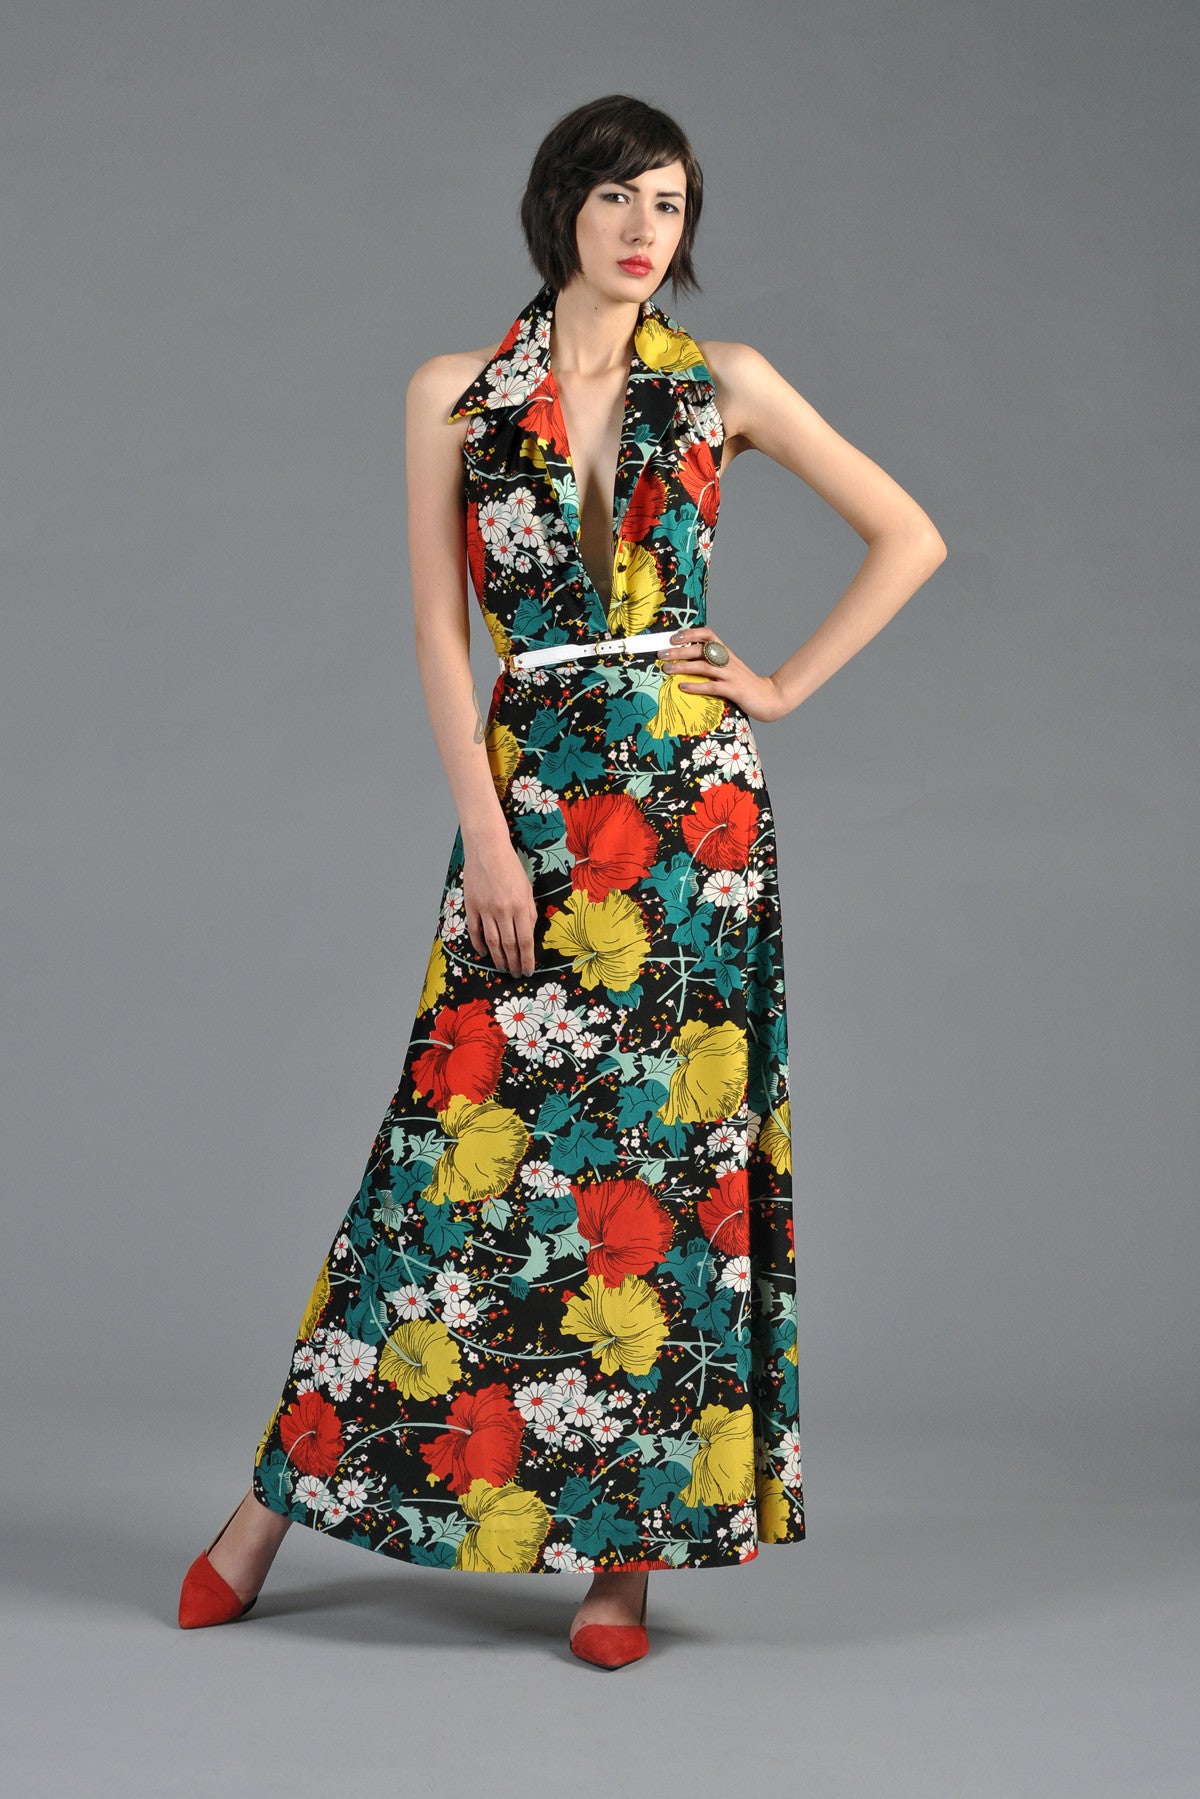 Graphic 1970s Backless Floral Maxi Dress w/Plunging Neckline